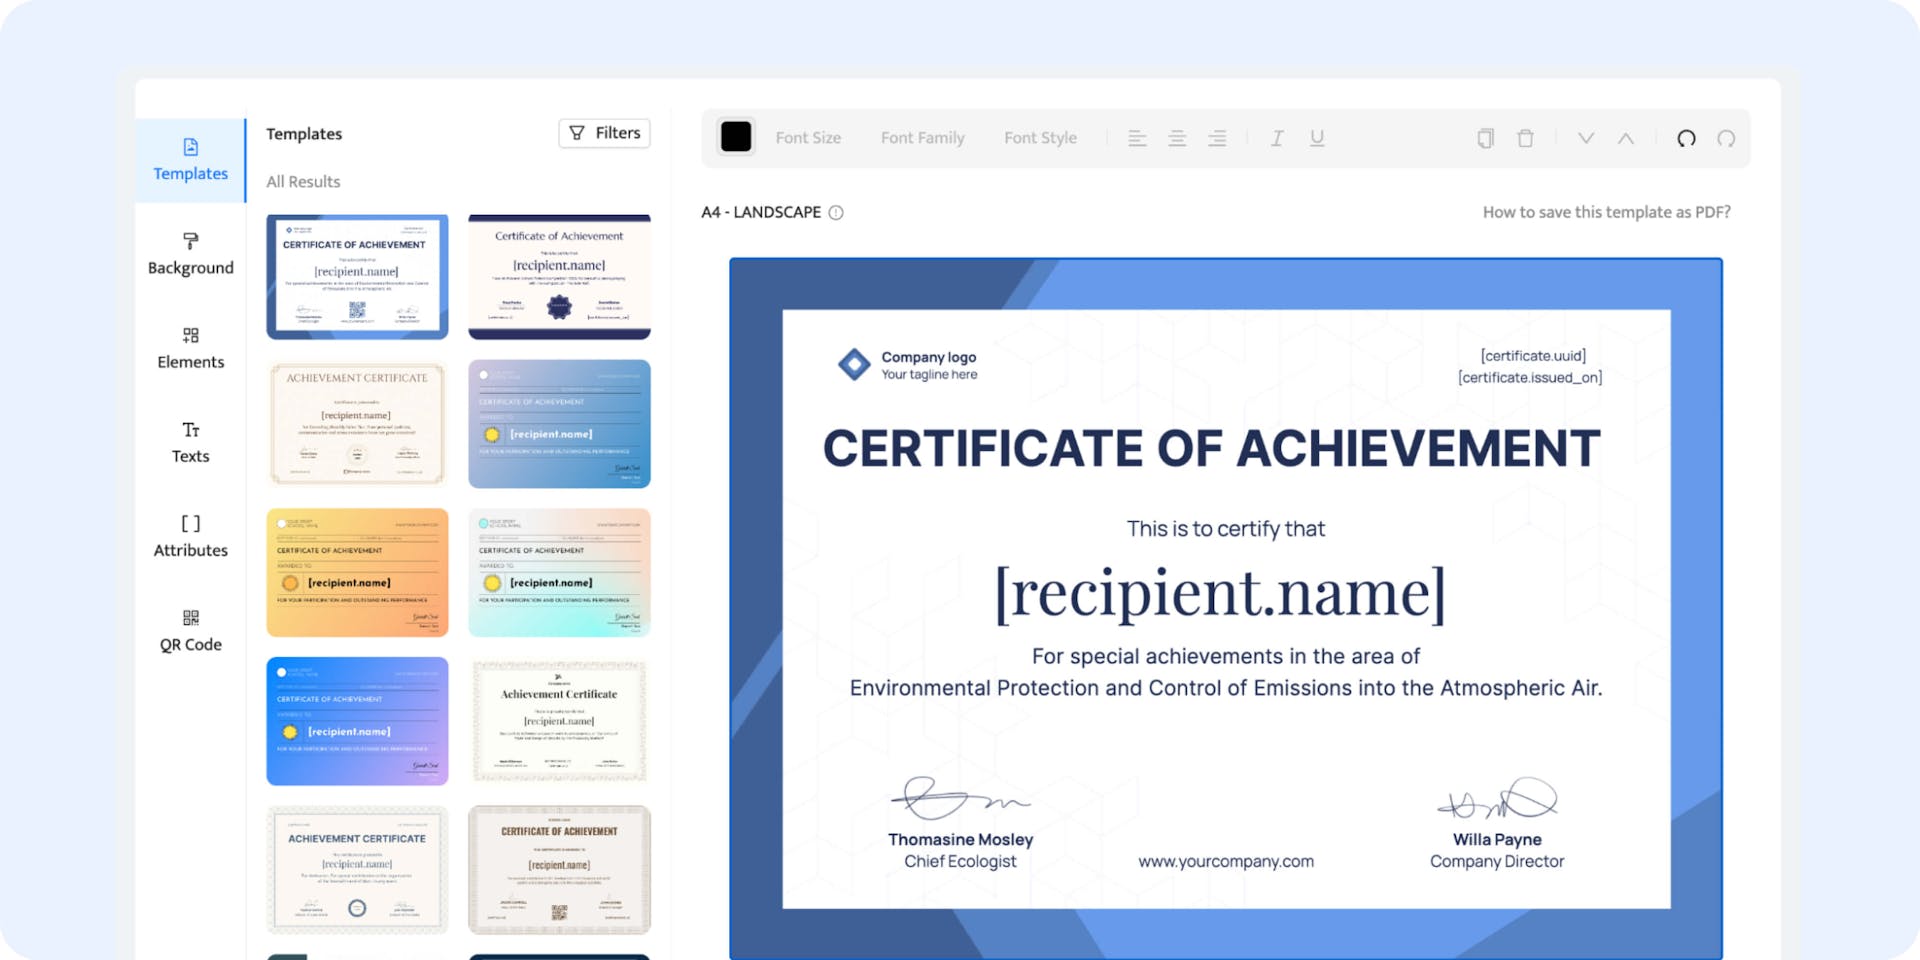 Certifier design builder templates tab to choose printable certificate to customize.